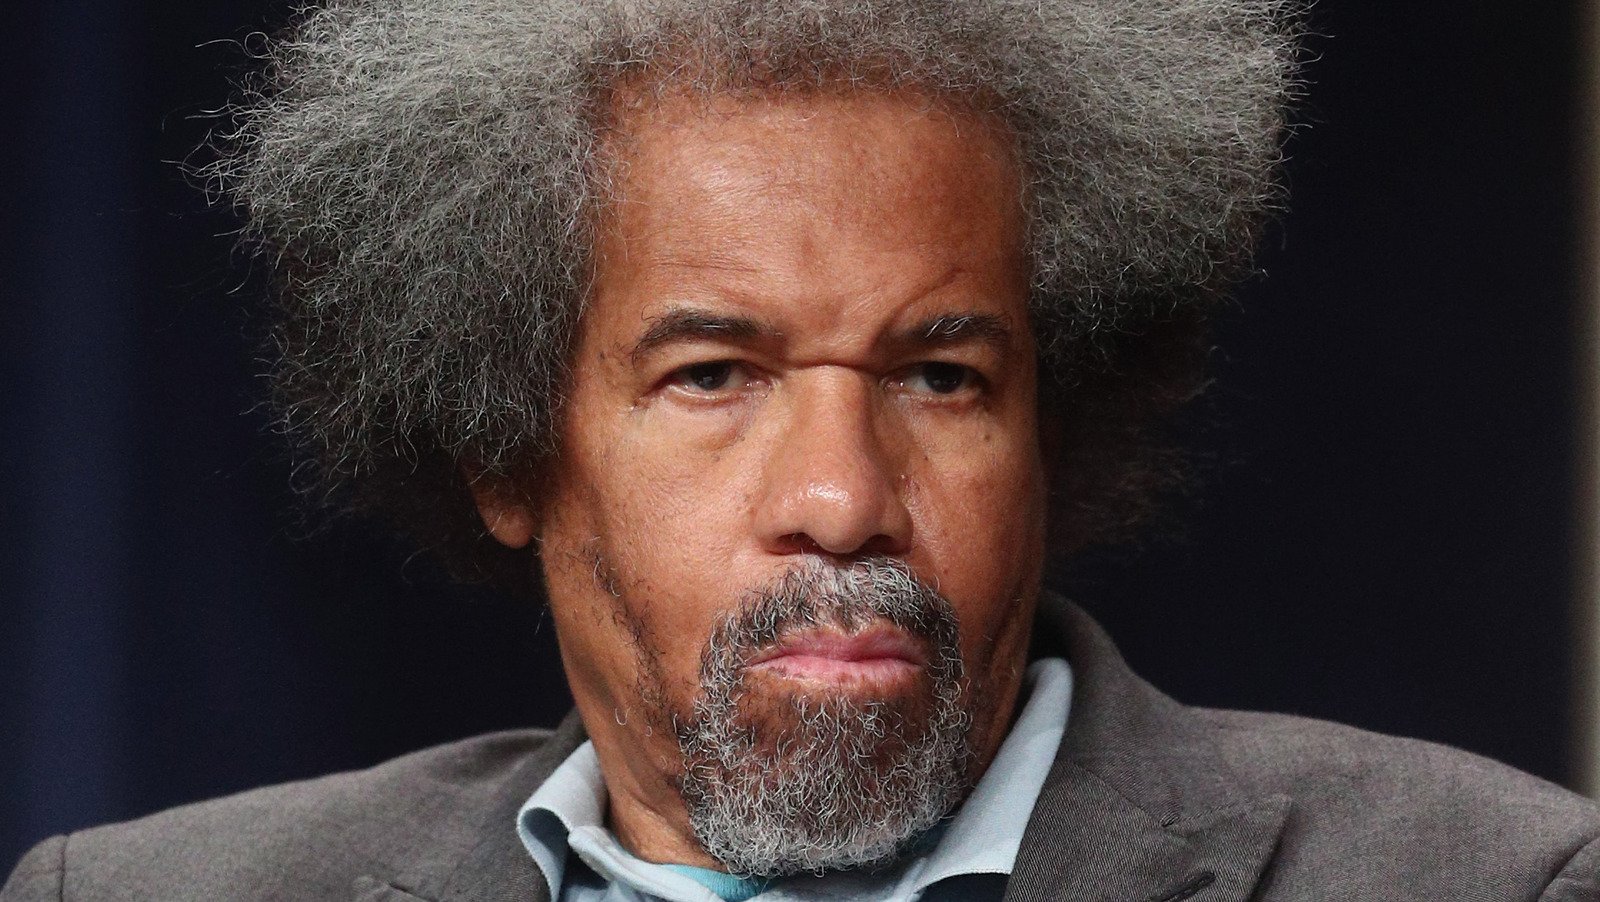 The Sad Truth About The First Place Albert Woodfox Visited After His Prison Release